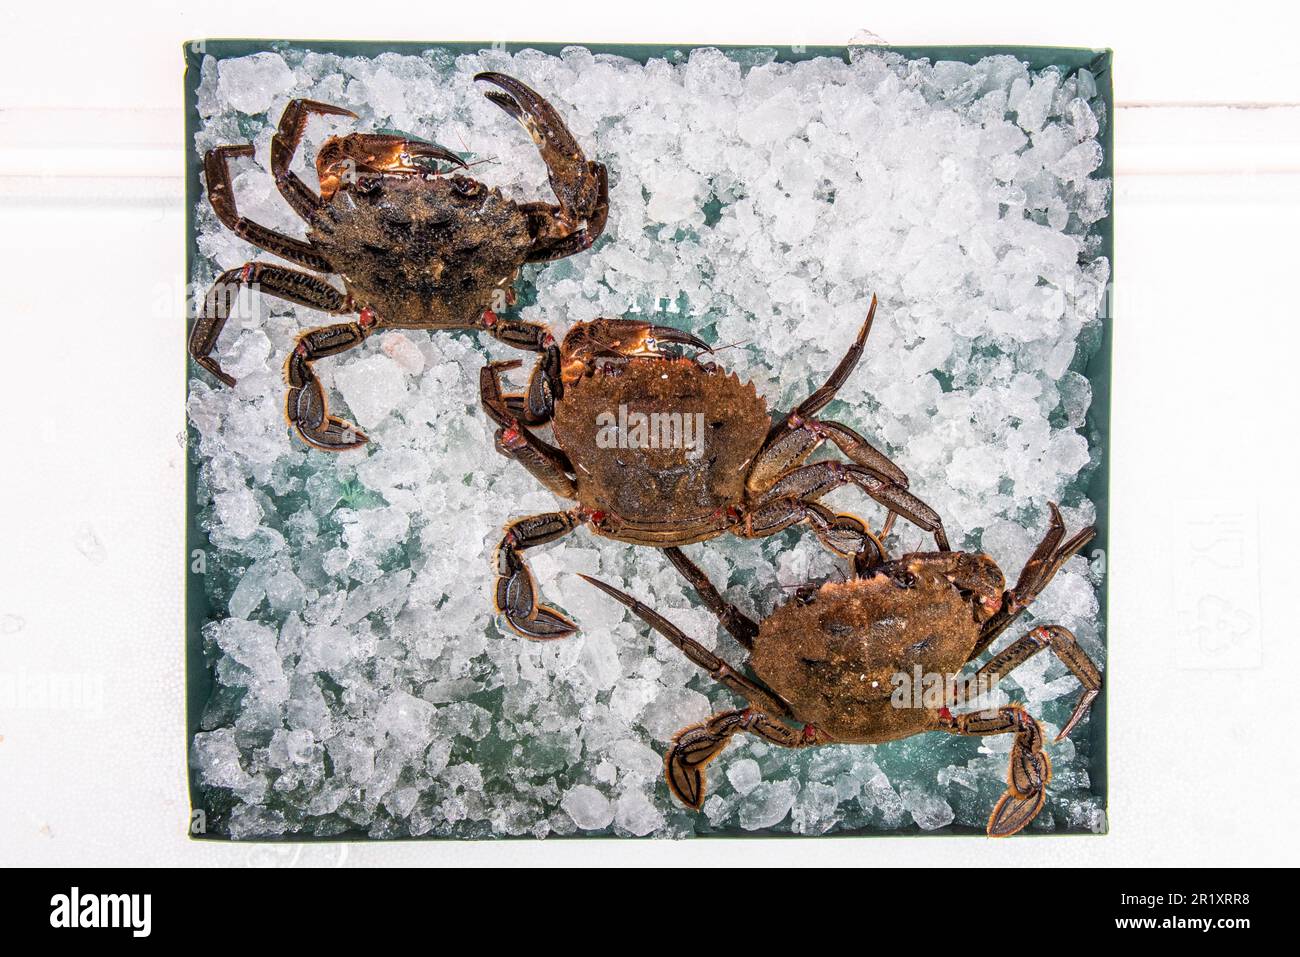 The velvet crab is a species of decapod crustacean in the infraorder Brachyura. From the family Portunidae, which includes the so-called swimming crab Stock Photo